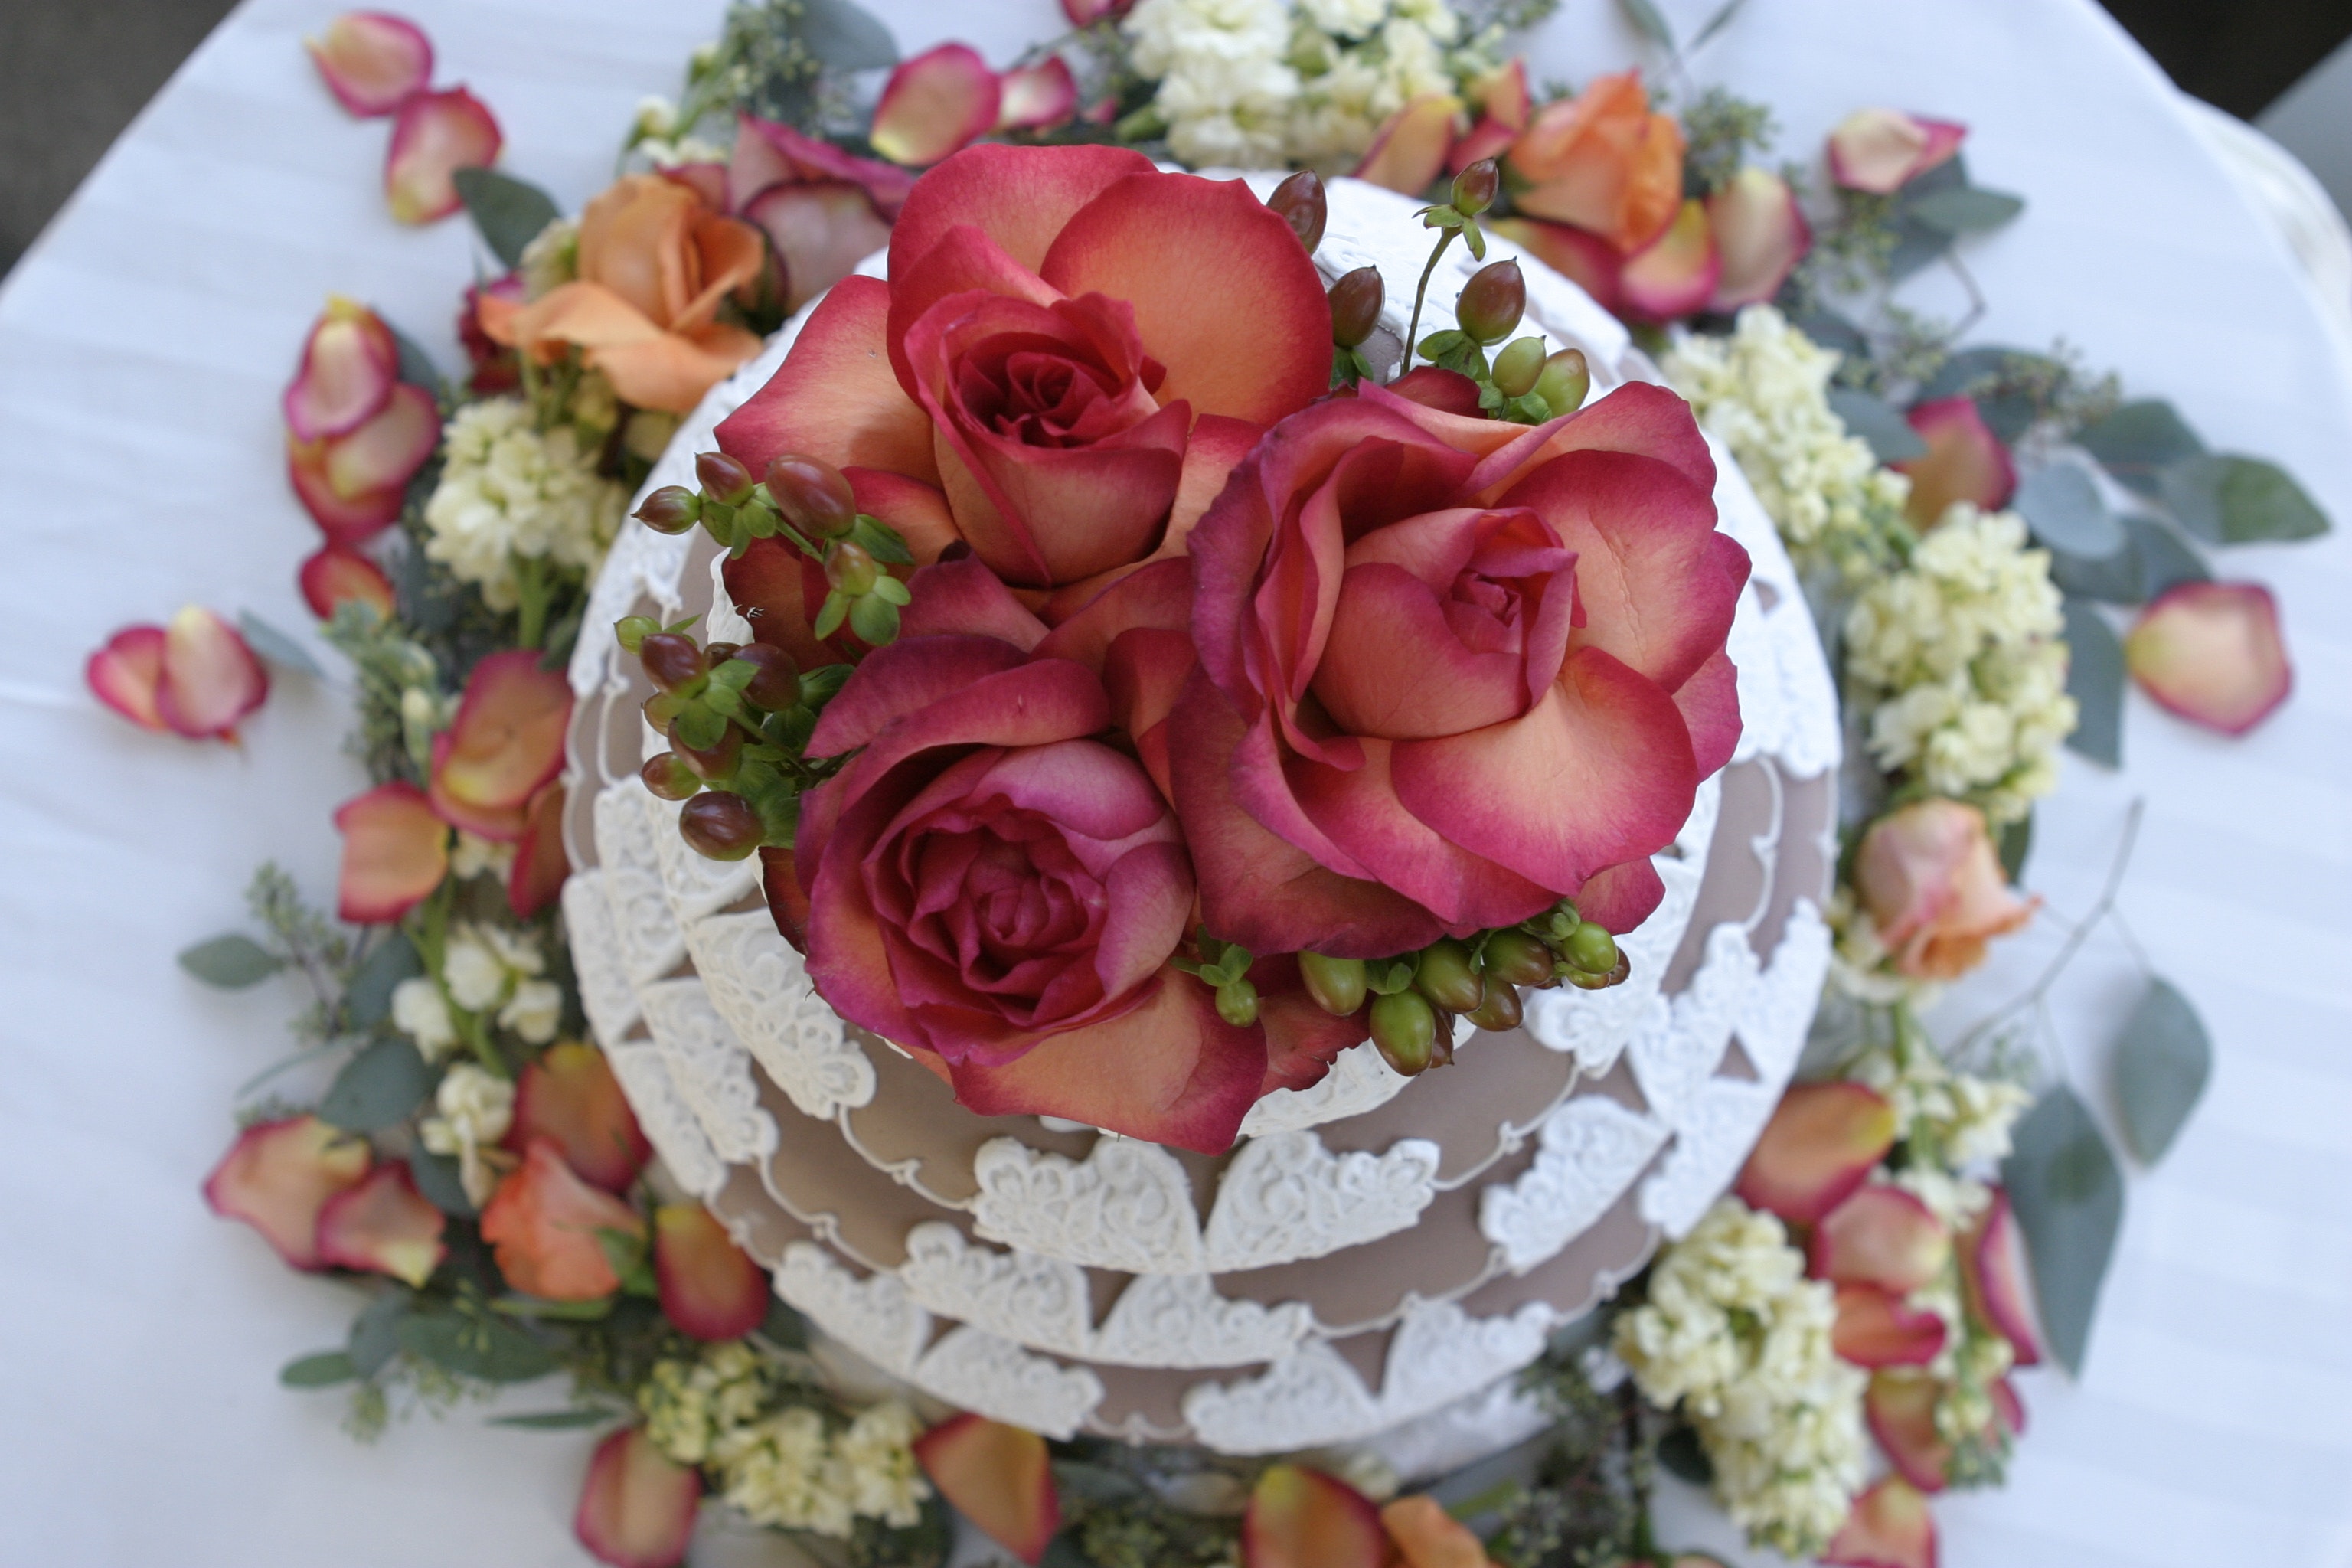 How to use edible flowers on cakes